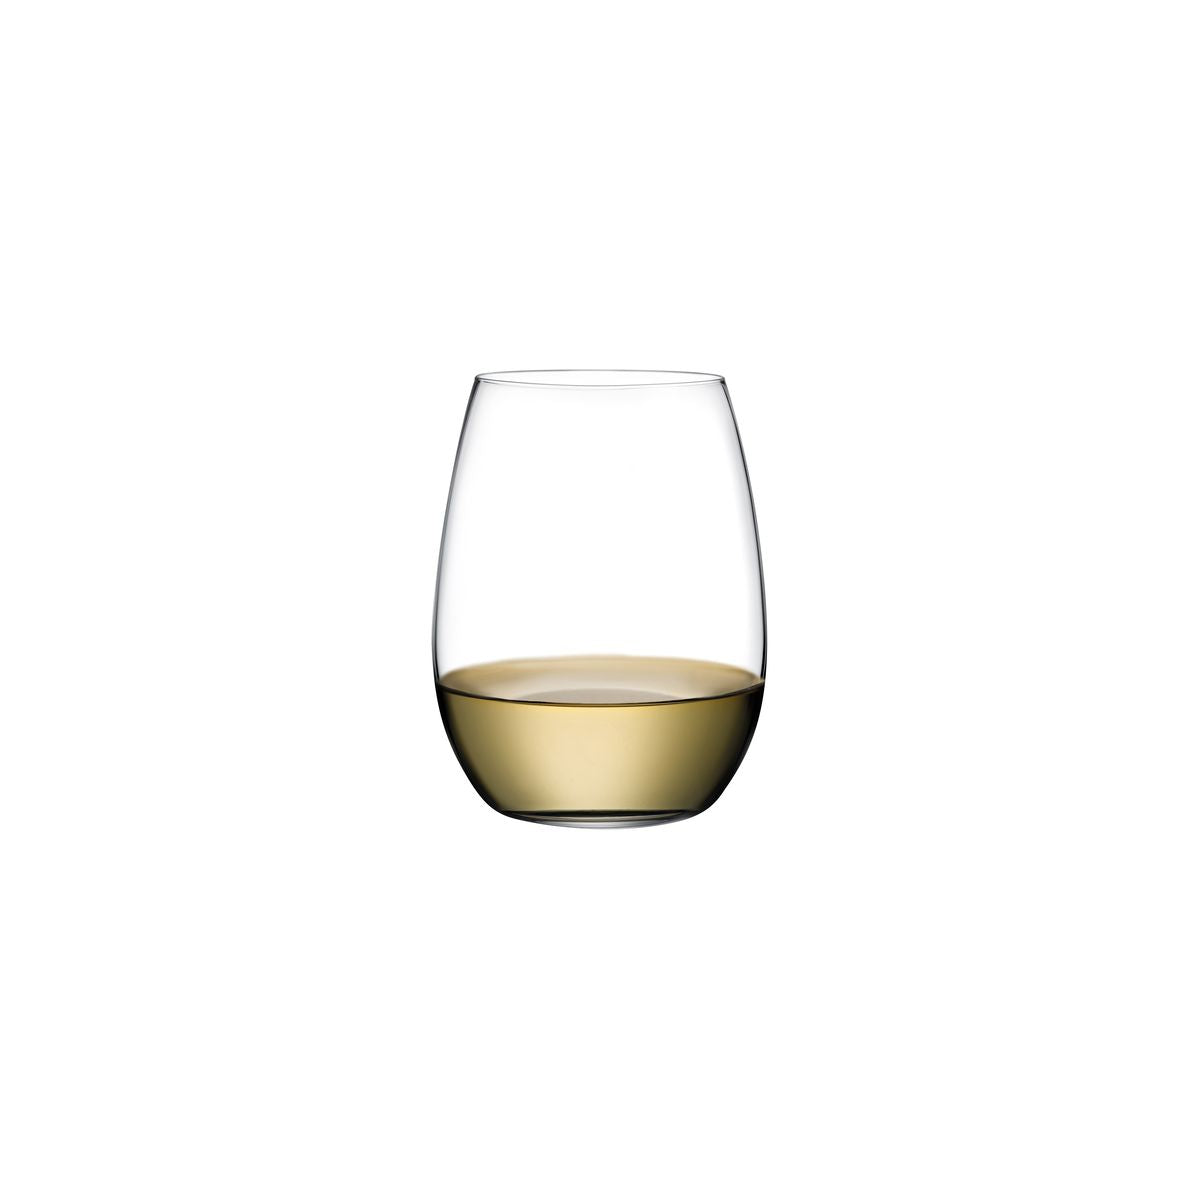 Pure Stemless White Wine - 390ml from Nude. Sold in boxes of 6. Hospitality quality at wholesale price with The Flying Fork! 